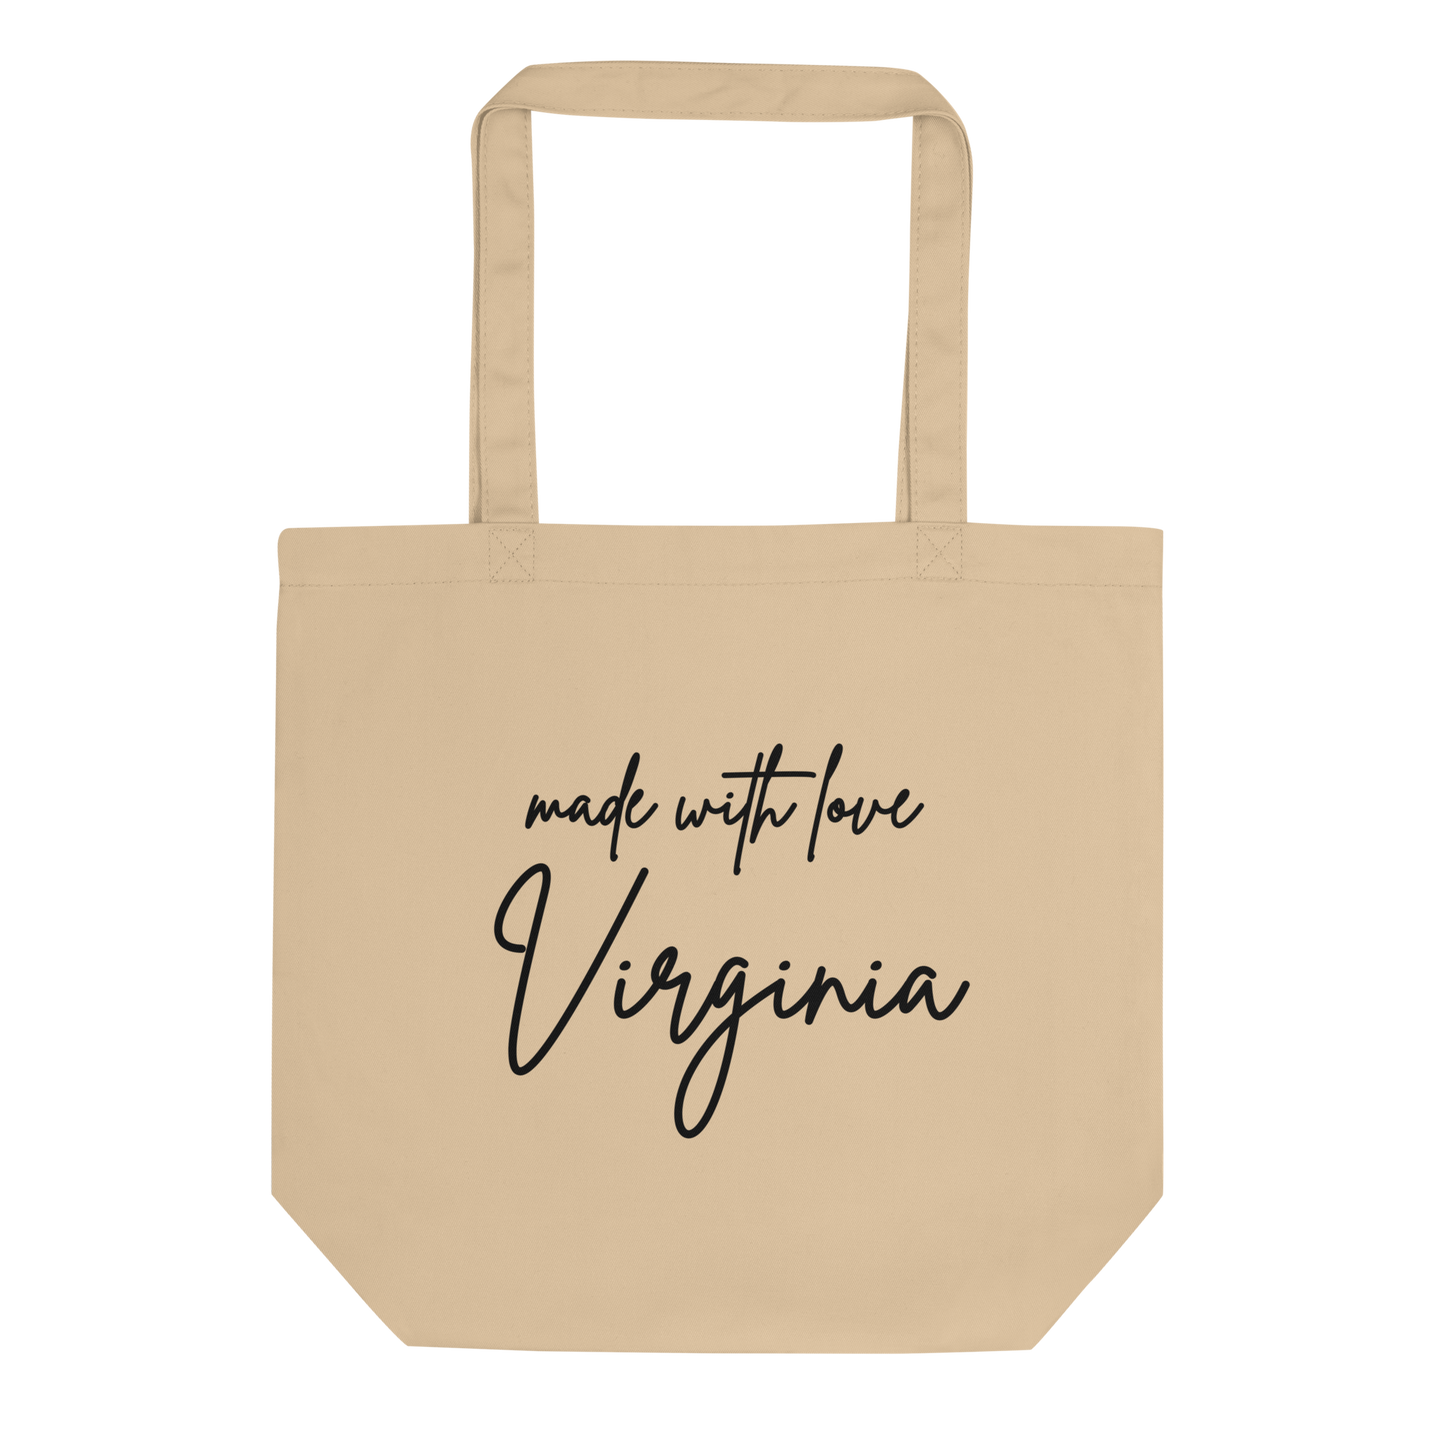 Made with Love Virginia Eco-friendly Tote Bag Black